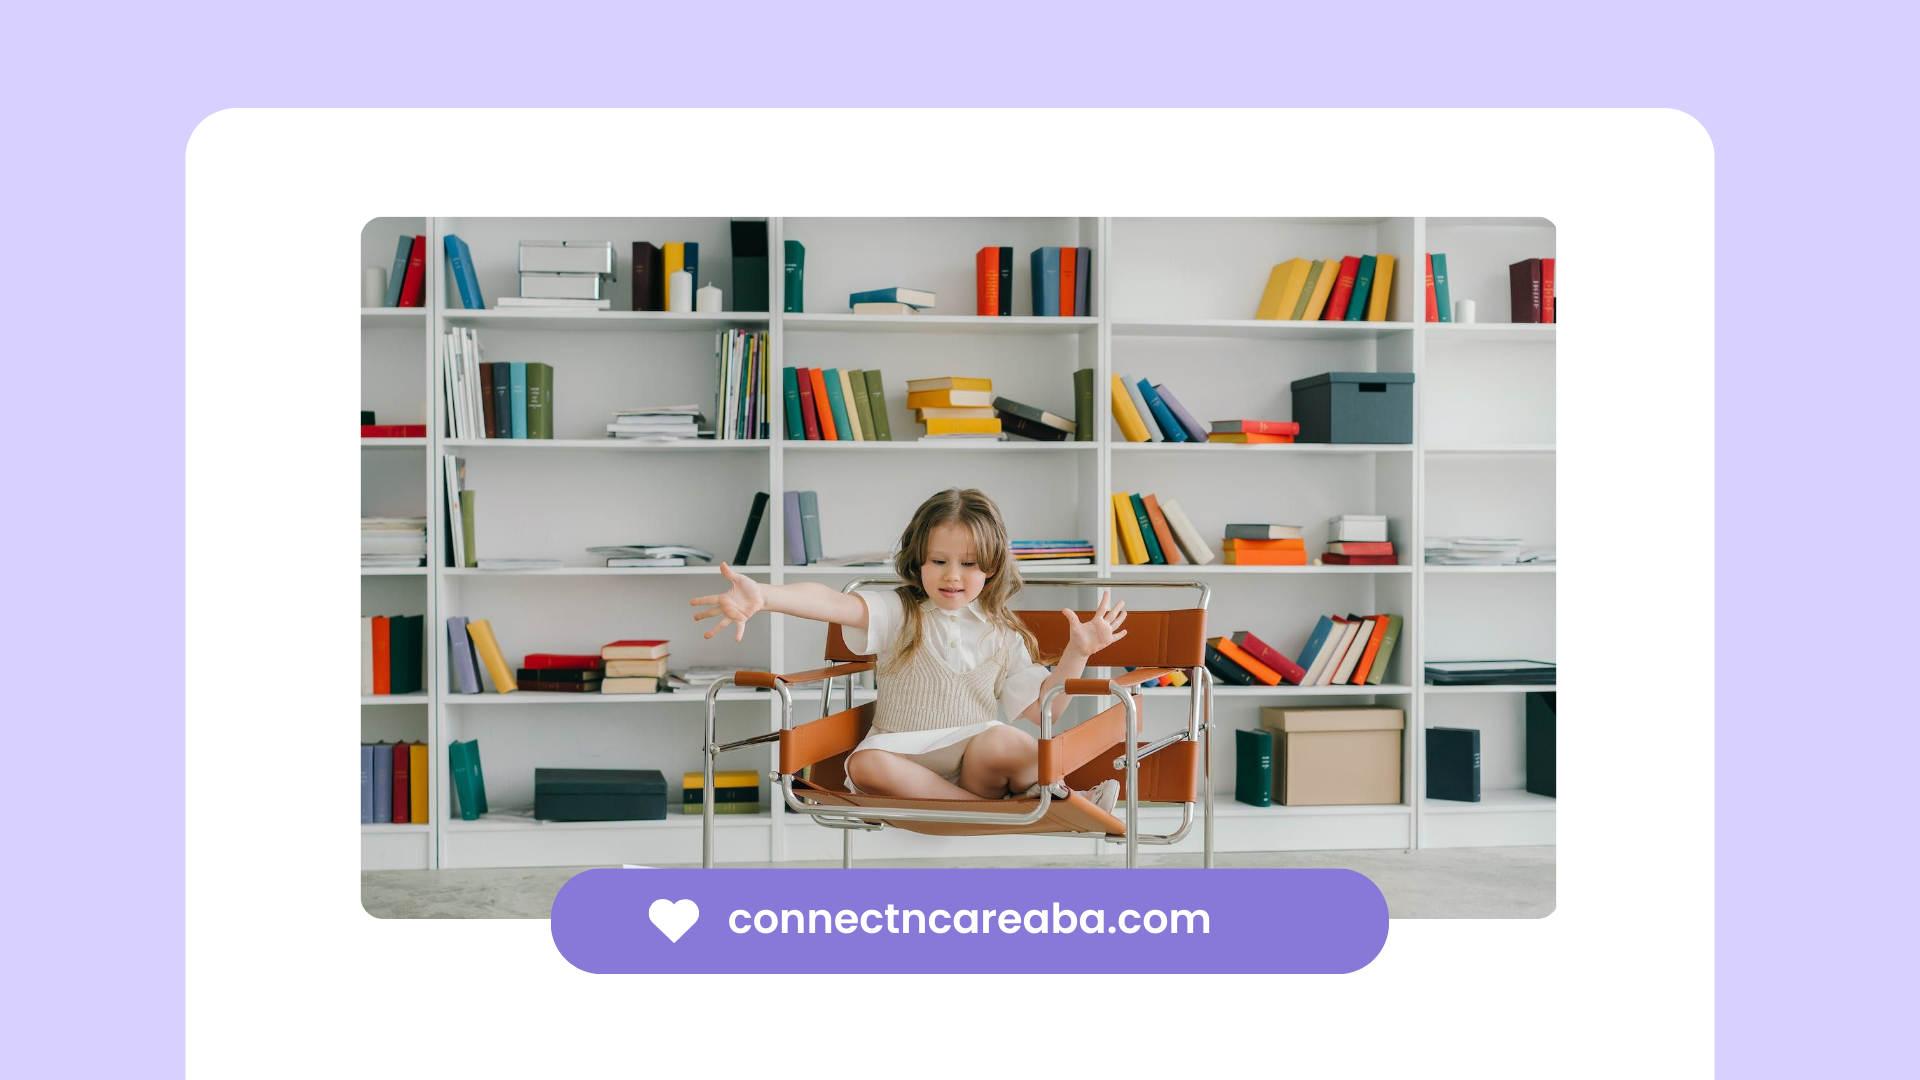 A little girl sitting on a chair in front of a bookshelf